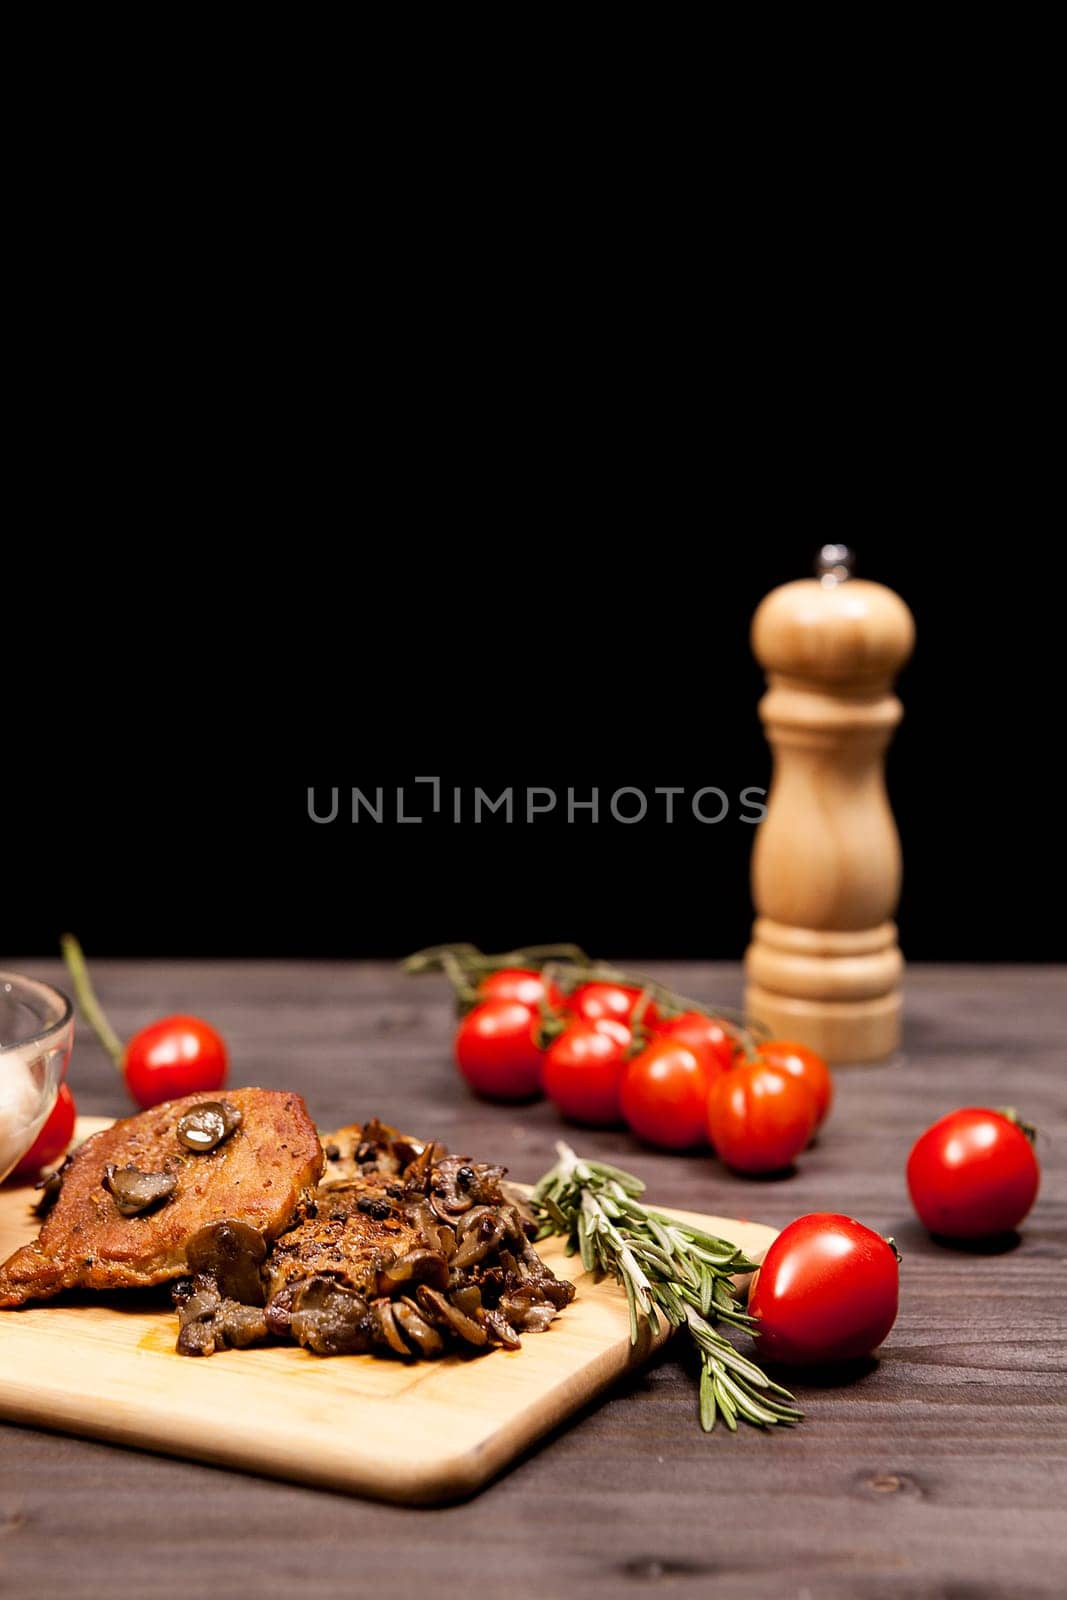 Grilled pork steak, mushrooms cherry tomatoes and a plate with bean paste on wooden plate on a table in studio photo on black background